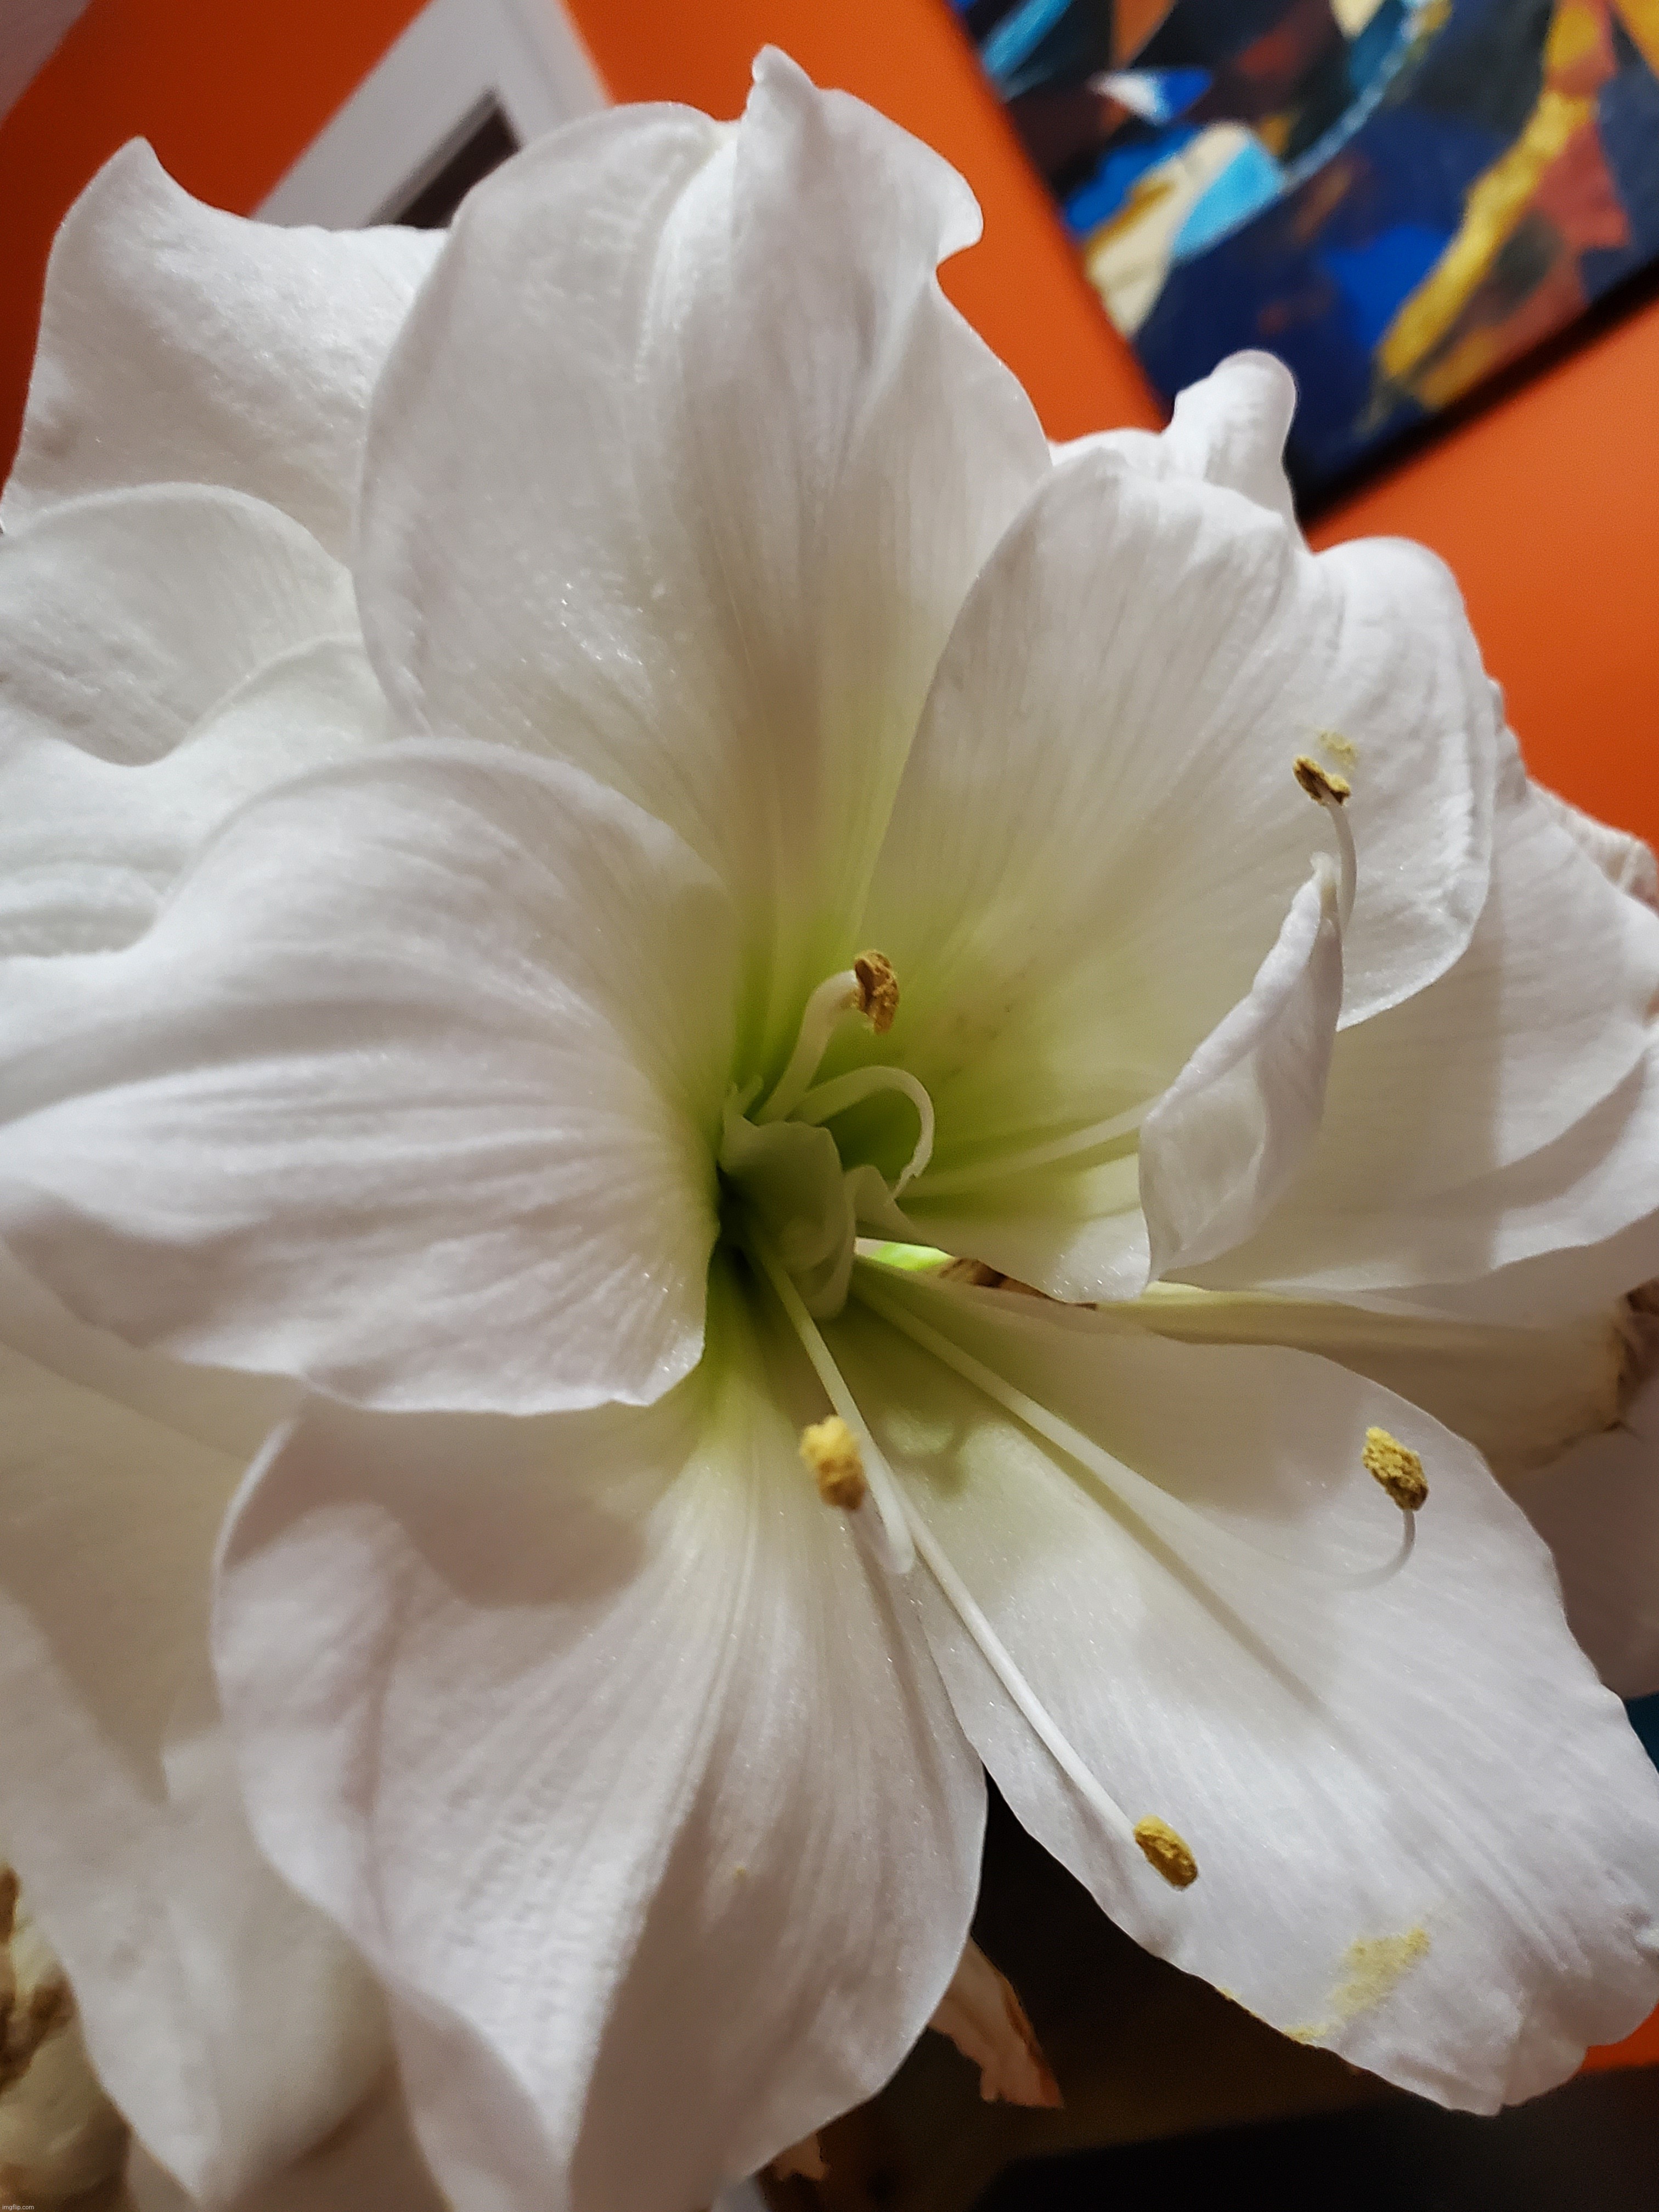 Flower | image tagged in photo | made w/ Imgflip meme maker